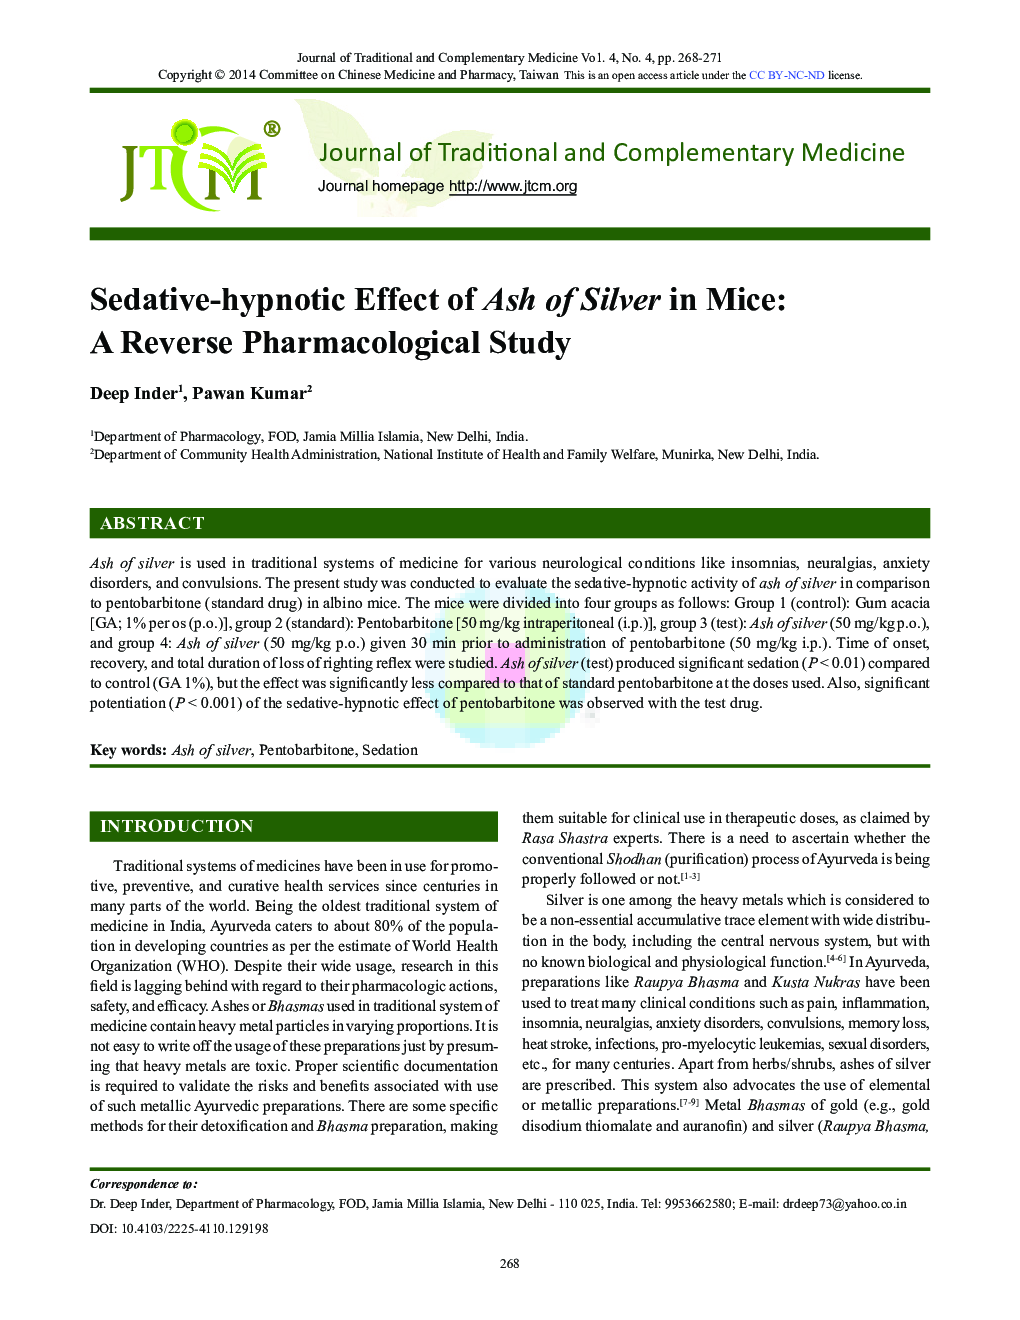 Sedative-hypnotic Effect of Ash of Silver in Mice: A Reverse Pharmacological Study